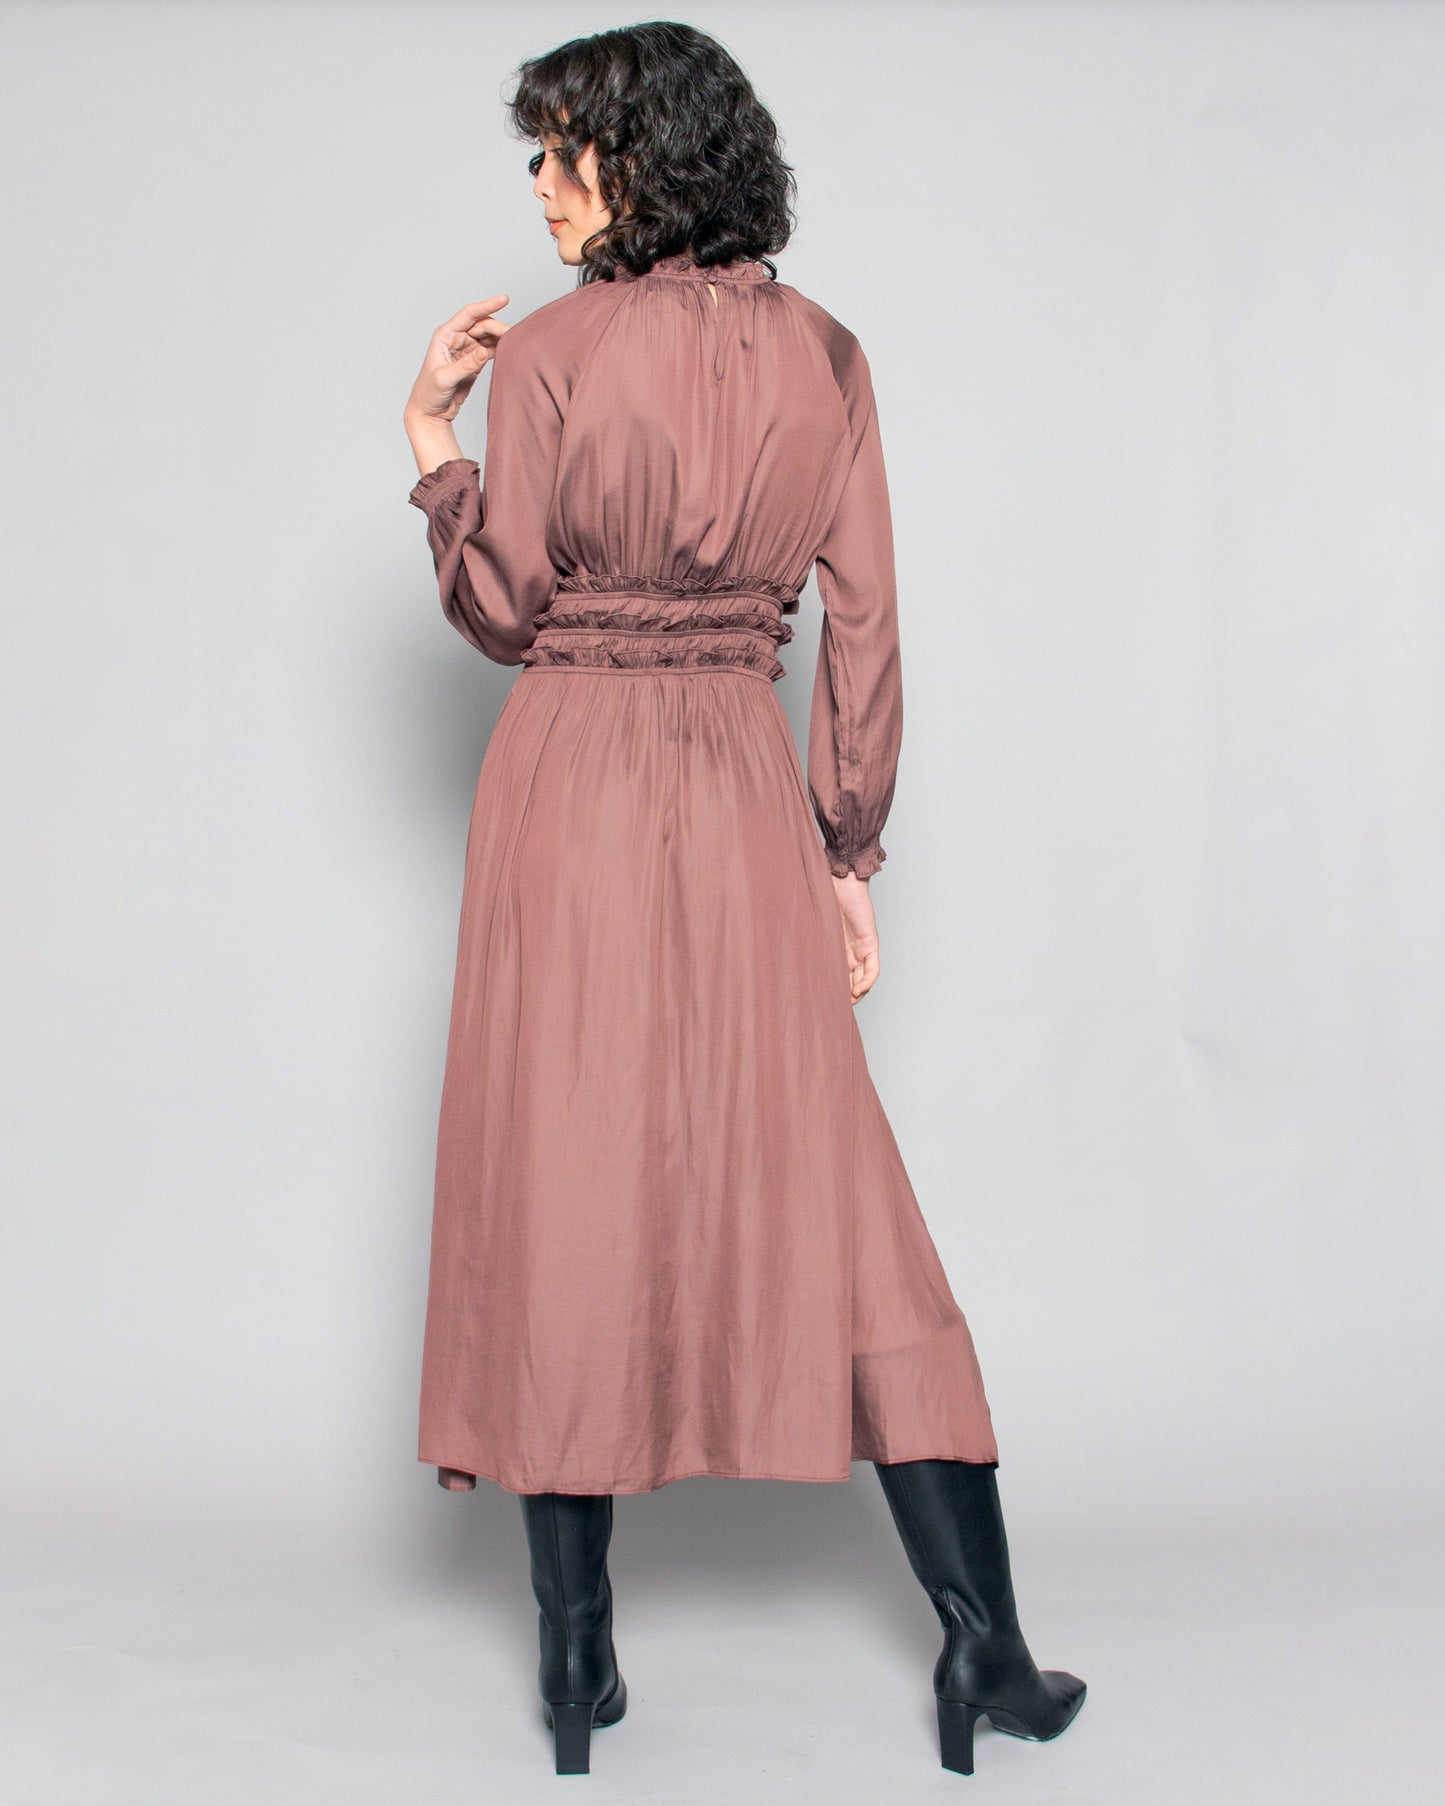 PERSONS Odessa Shirred Midi Dress in Rust available at Lahn.shop